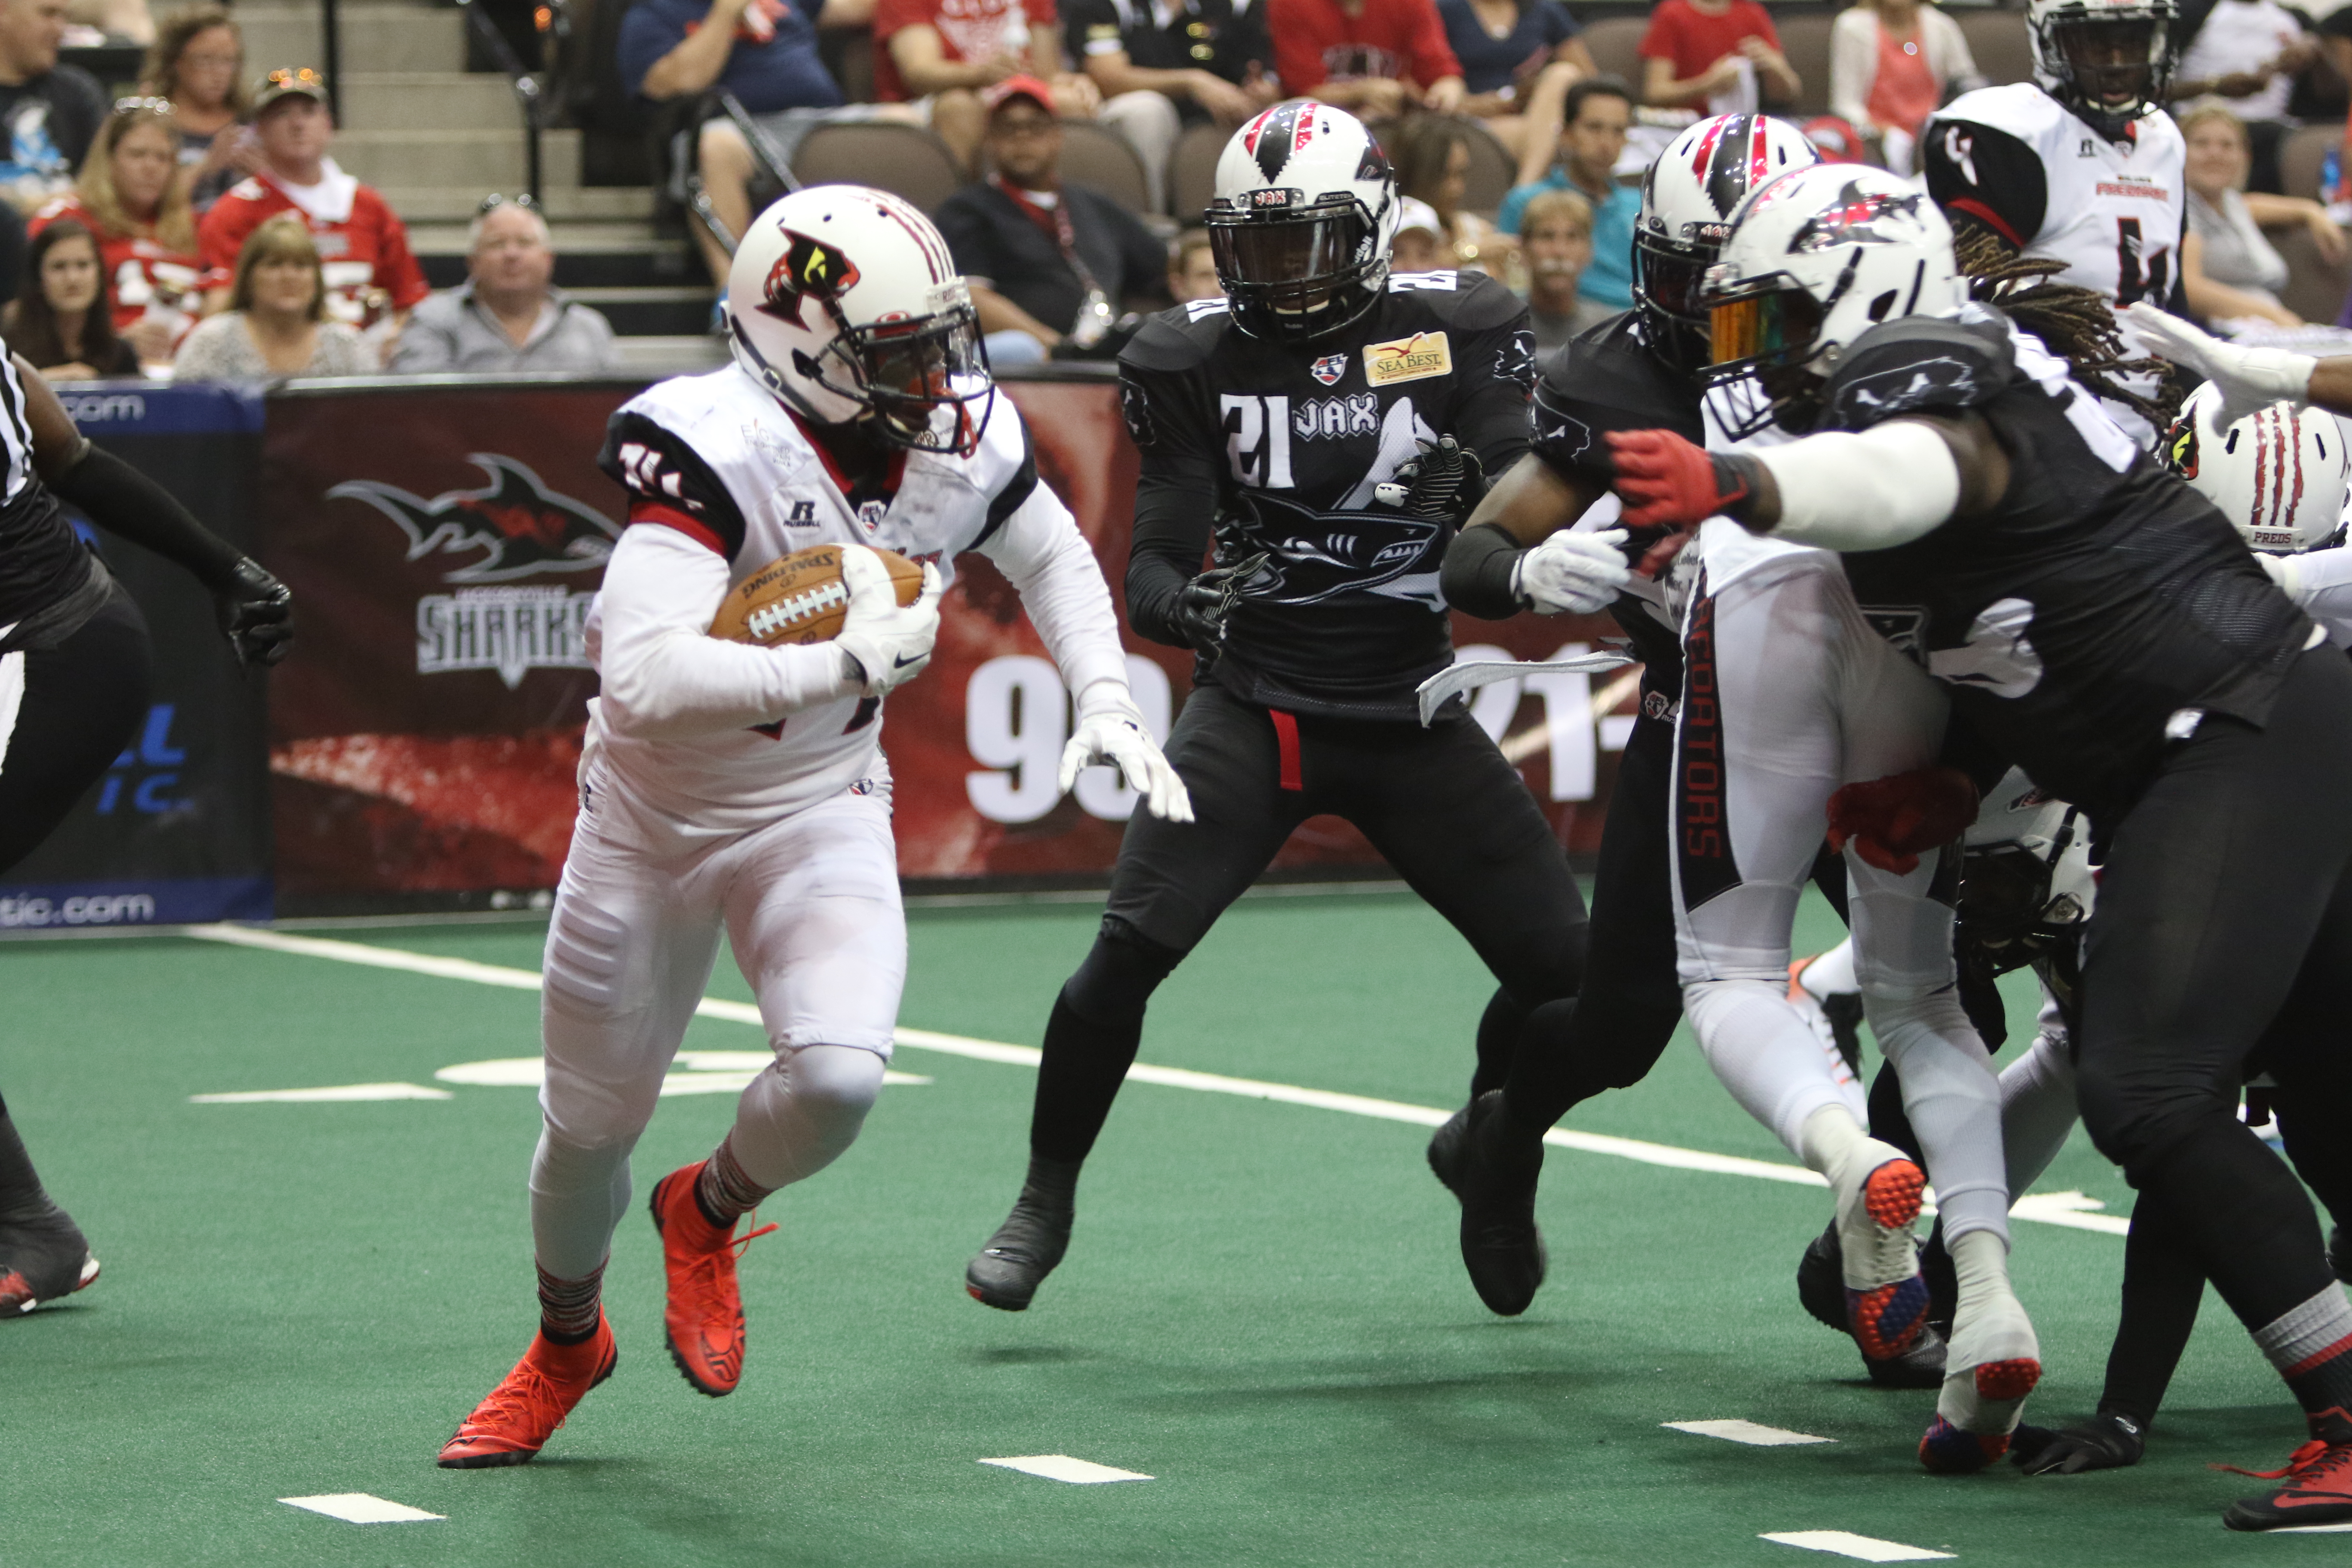 Rivalry between Jacksonville Sharks, Orlando Predators goes to new level  after starting QB switches sides